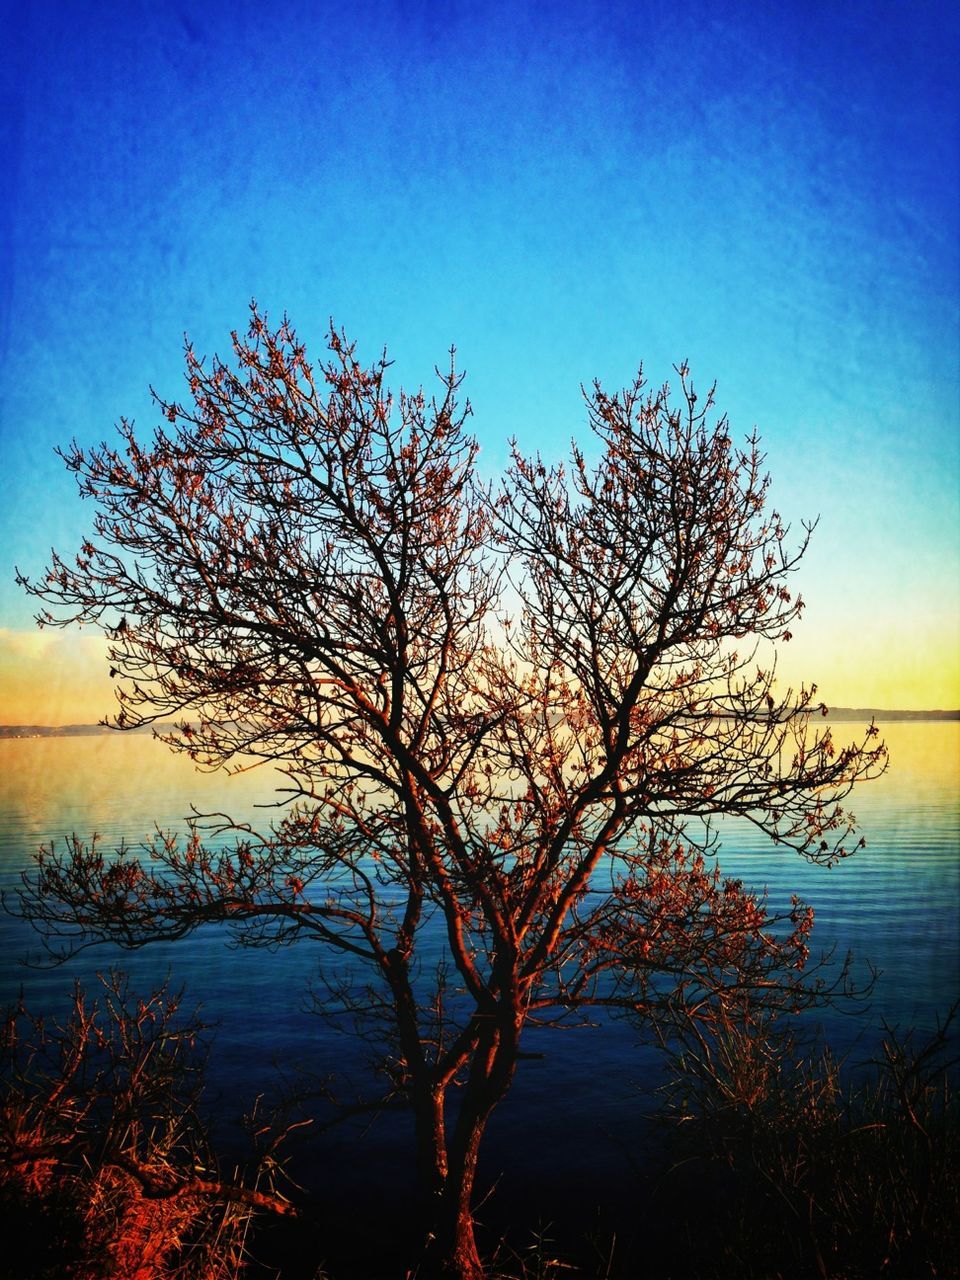 tranquility, tranquil scene, water, scenics, beauty in nature, nature, branch, tree, clear sky, bare tree, blue, lake, sky, idyllic, silhouette, sunset, reflection, copy space, outdoors, sea